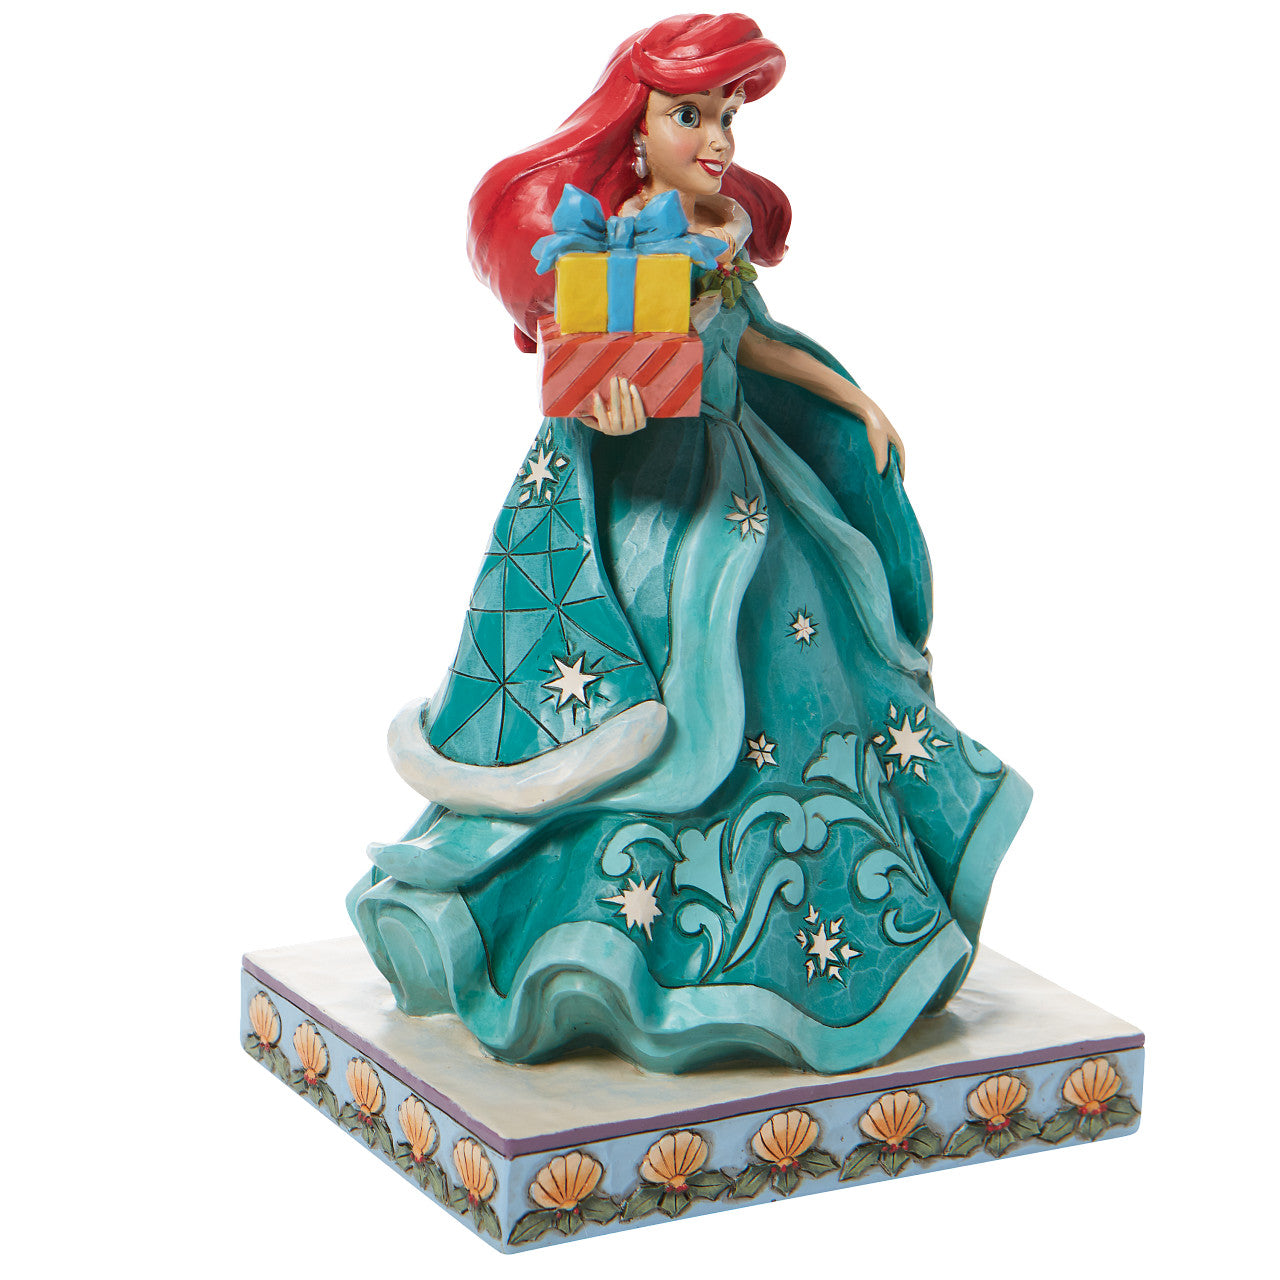 Gifts of Song - Ariel with Gifts